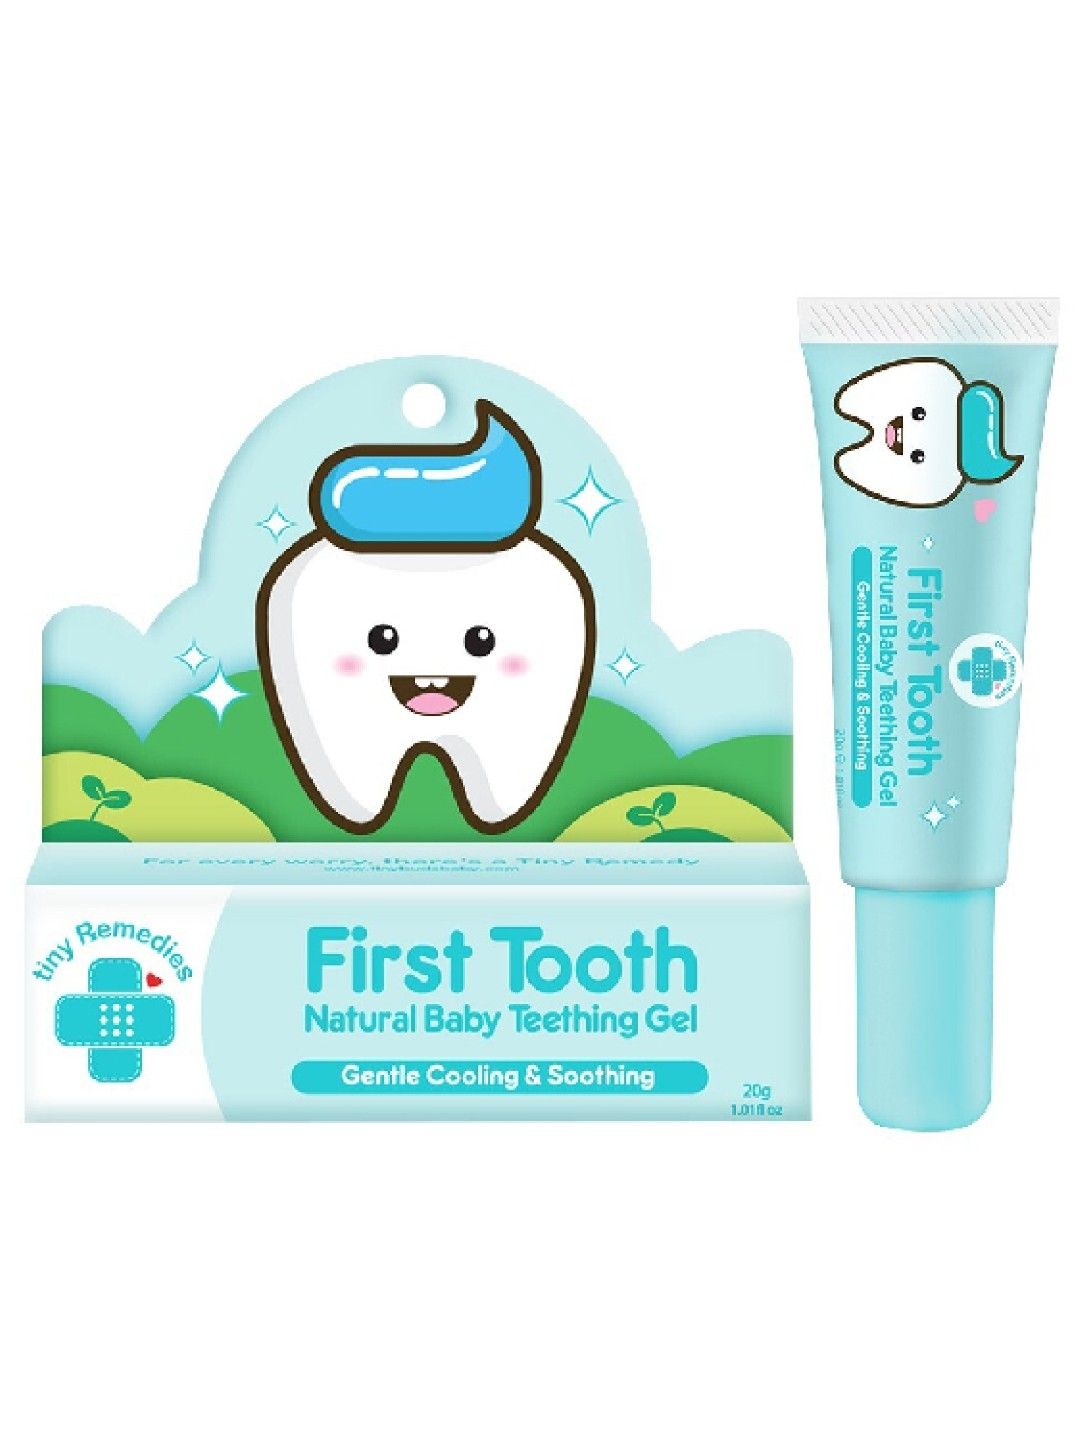 Tiny Buds First Tooth Natural Baby Teething Gel